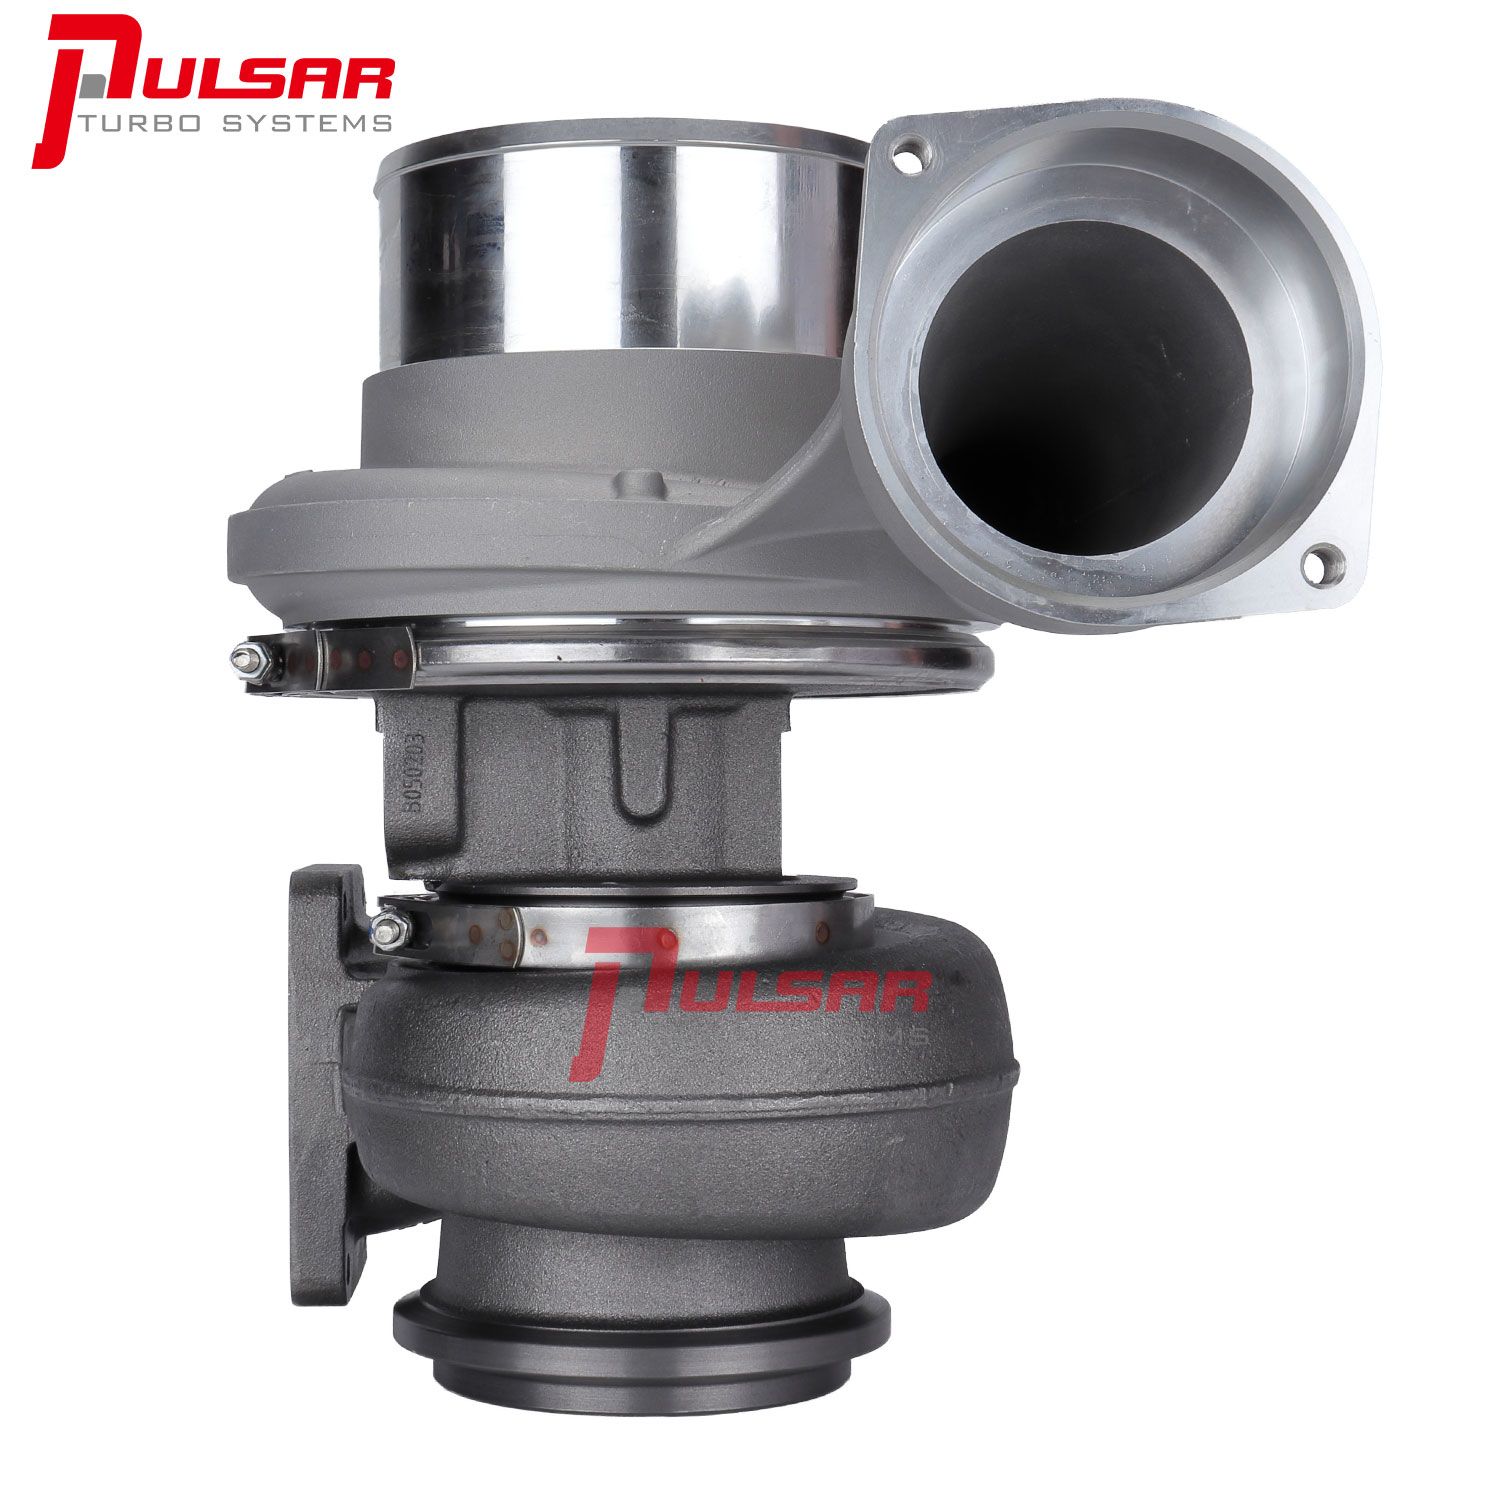 PULSAR Stage1 Upgrade S478 Turbo for CAT 3406E C15 Engine